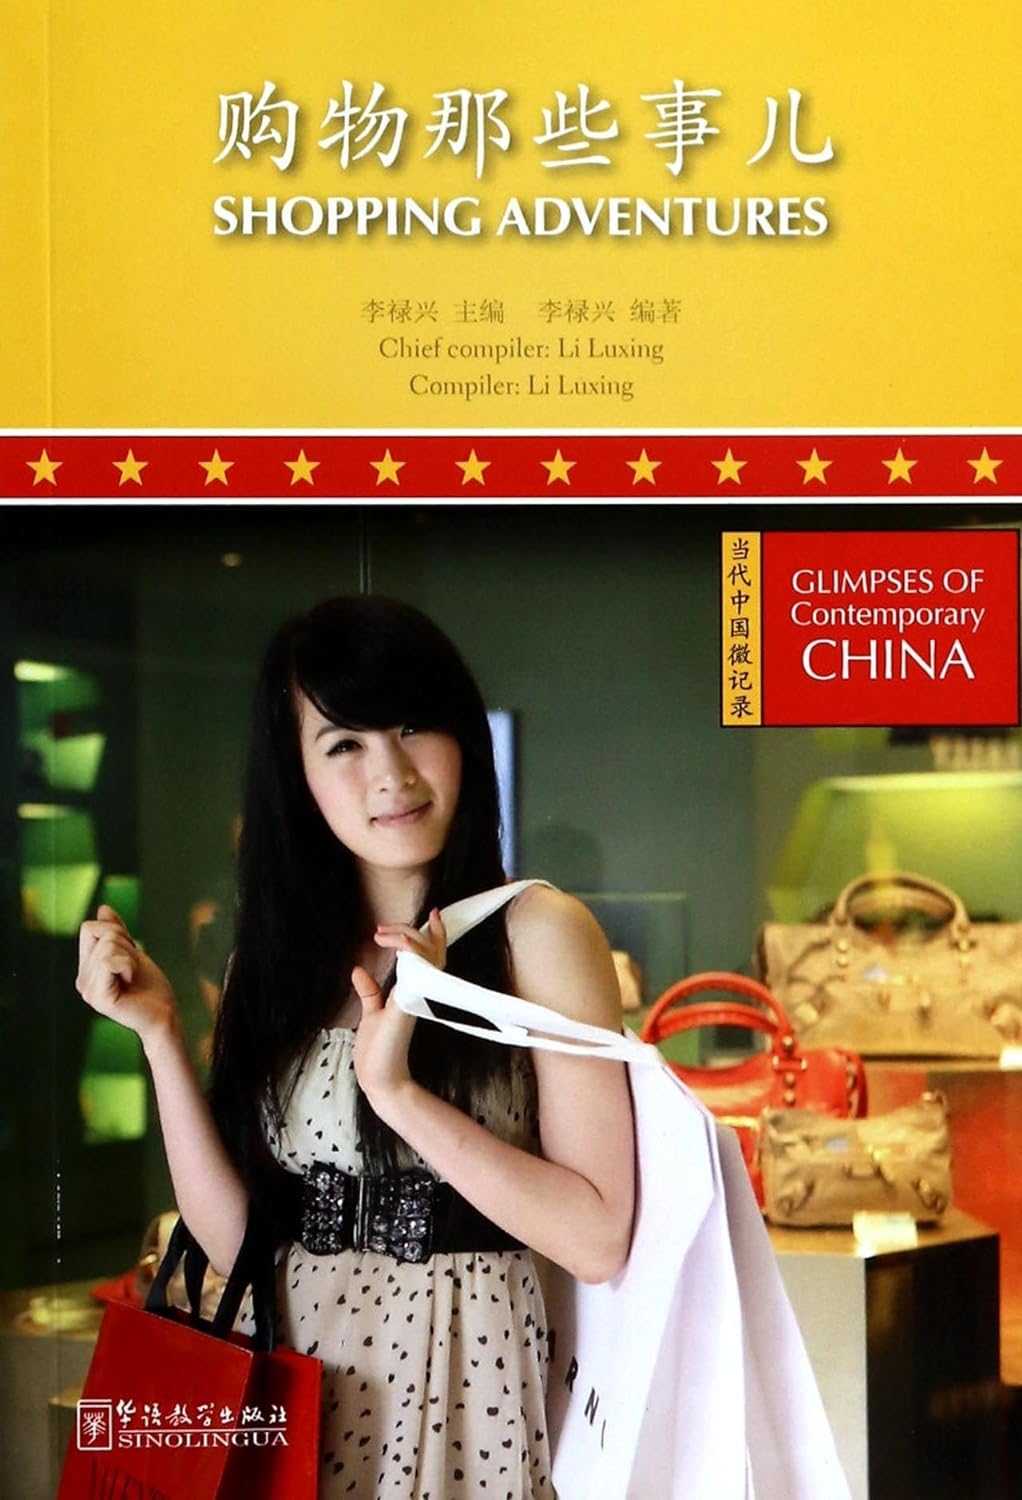 Glimpses of Contemporary China--Shopping Adventures